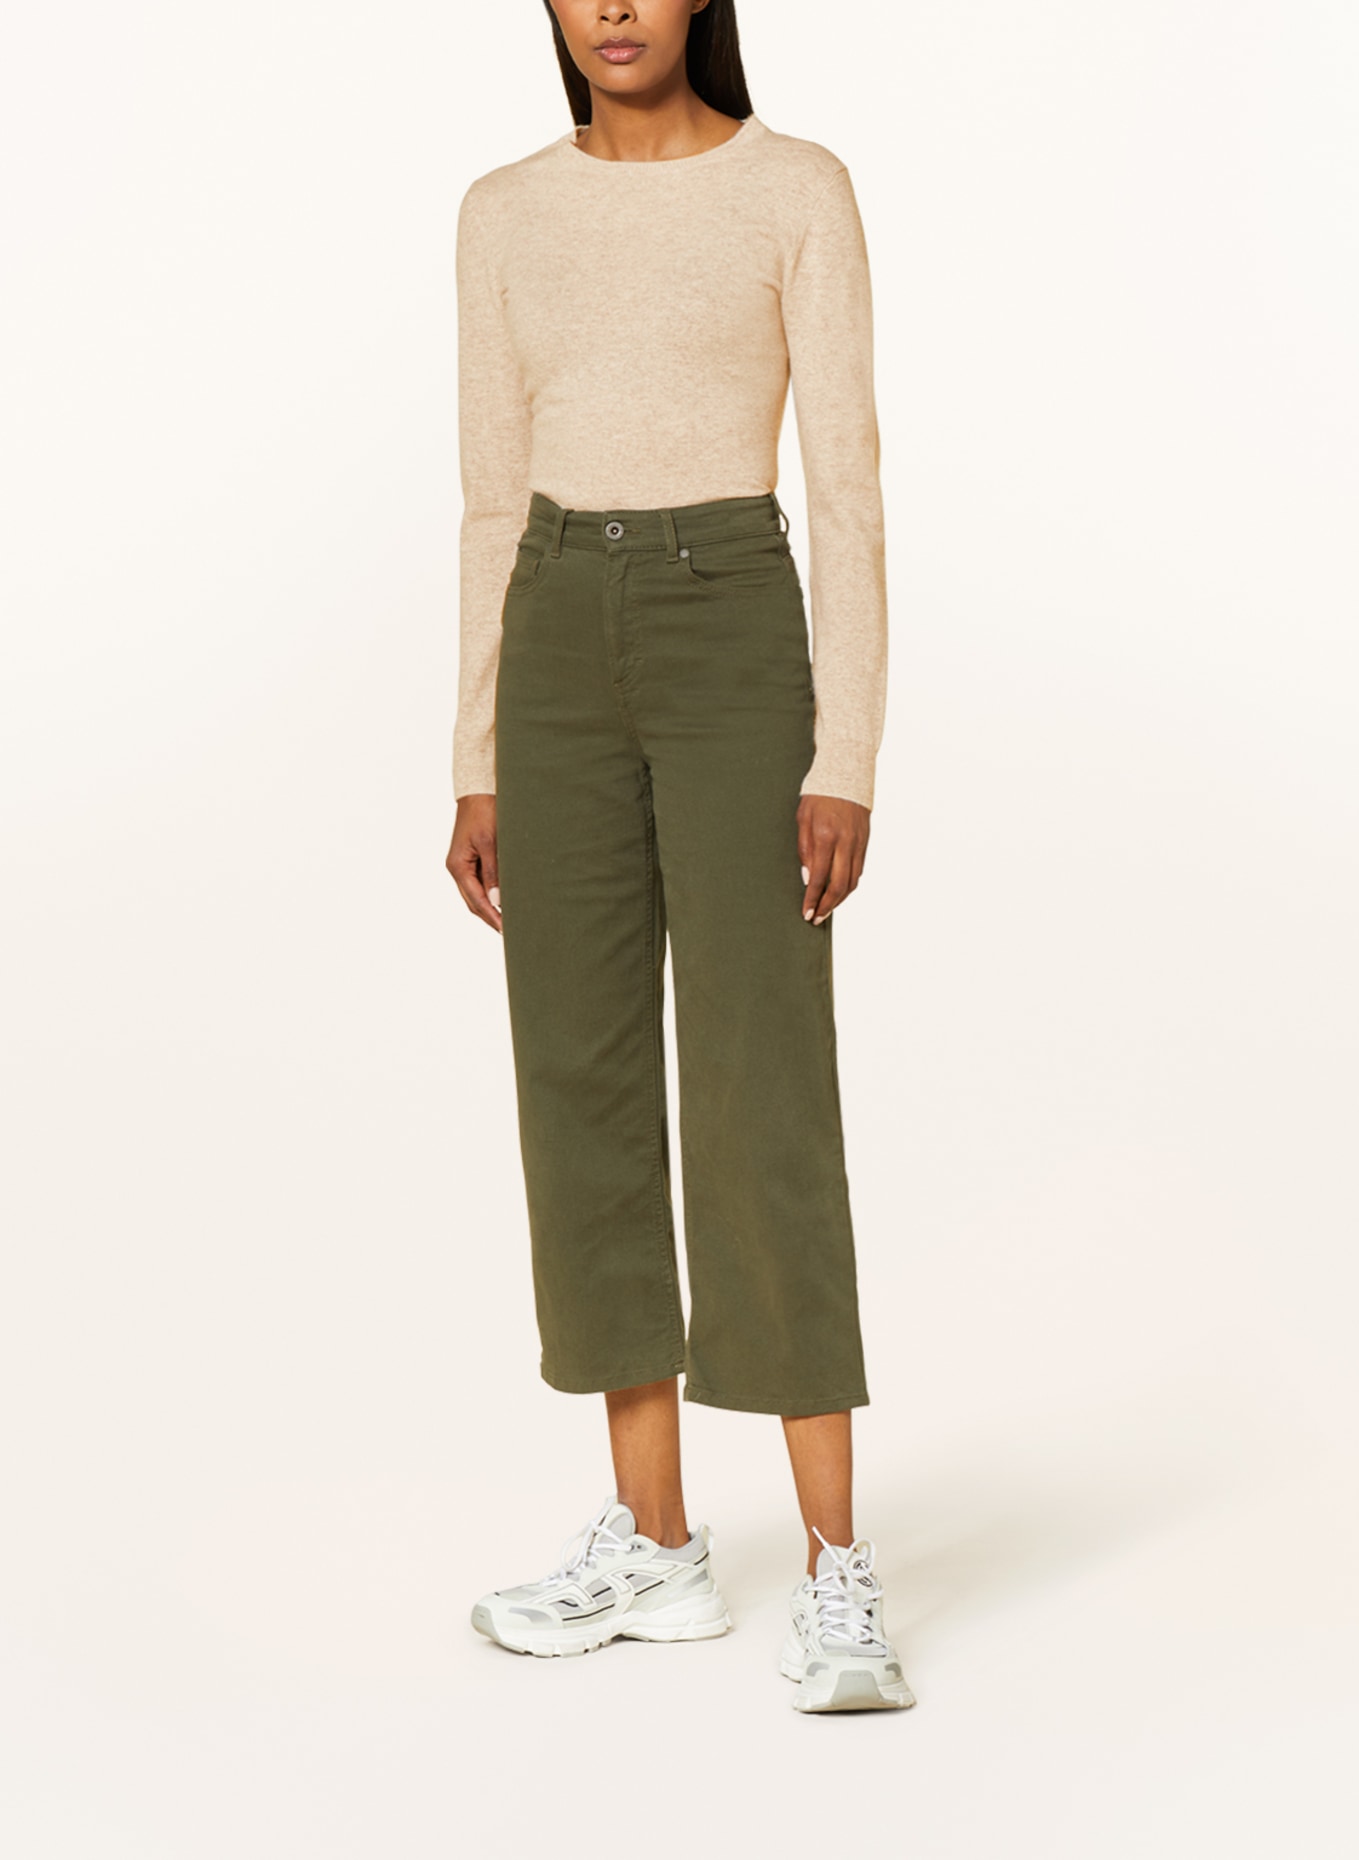 REPEAT Cashmere sweater, Color: BEIGE (Image 2)